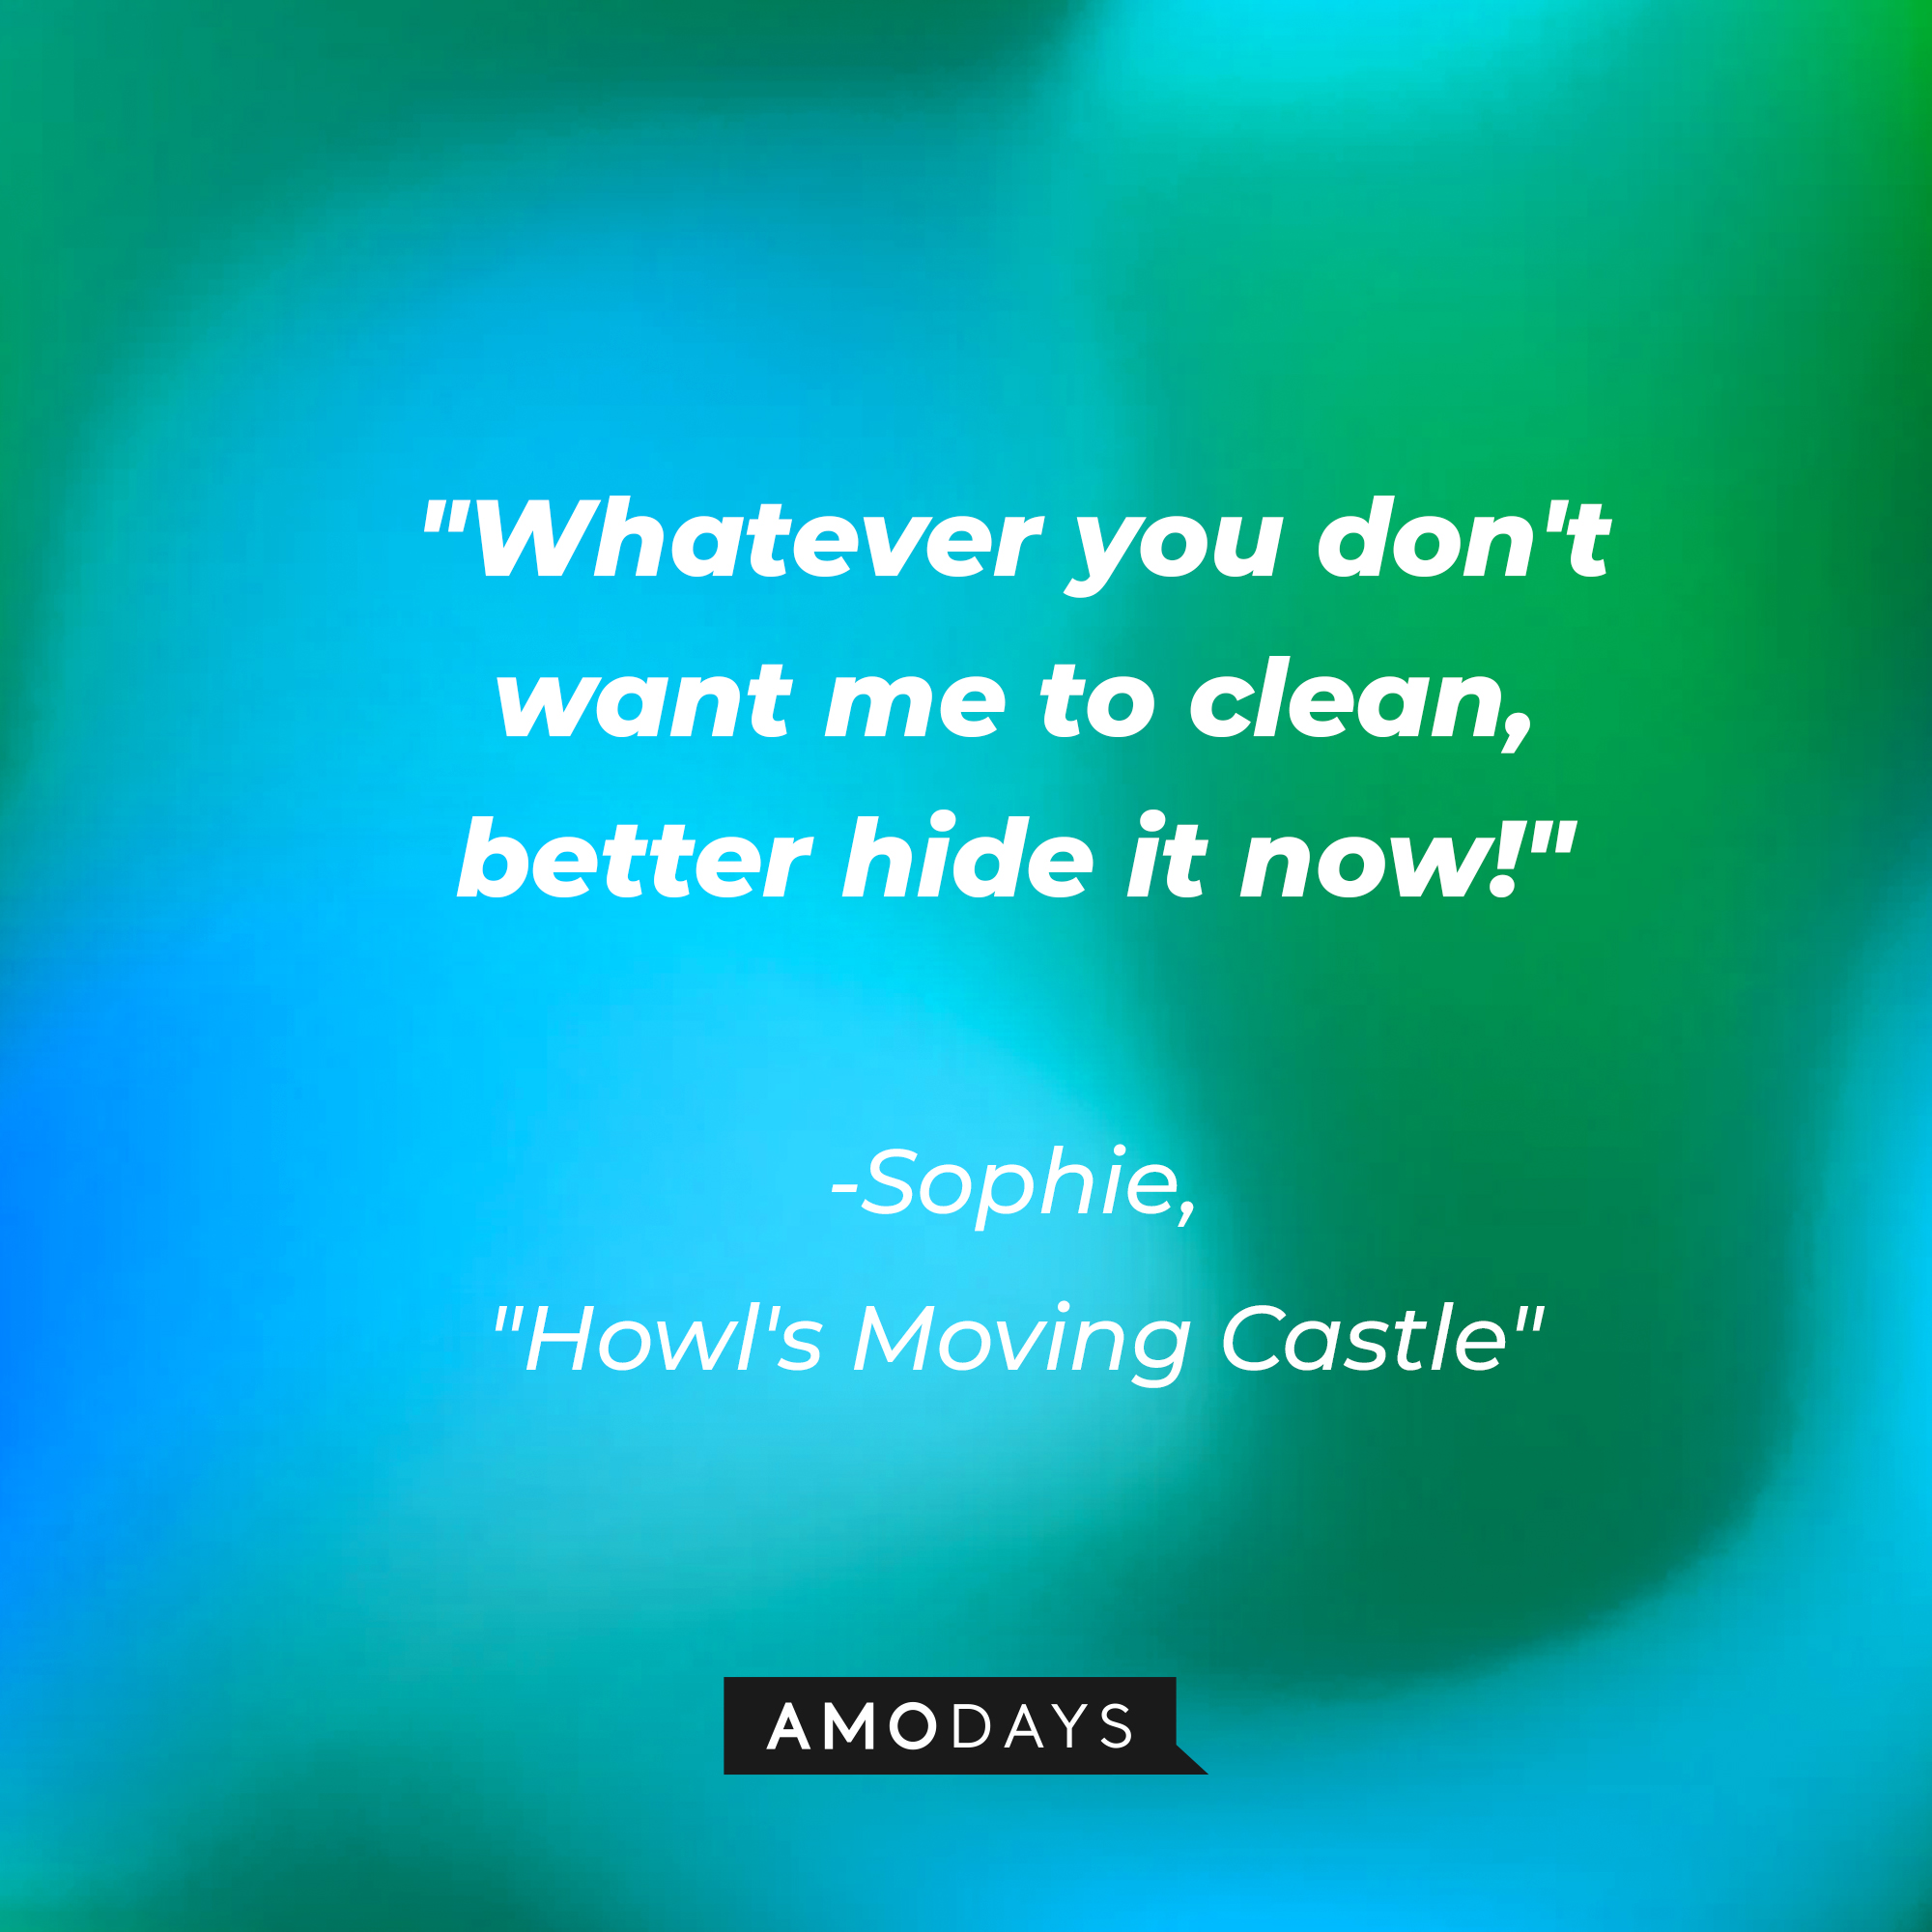 Sophie's quote in "Howl's Moving Castle:" "Whatever you don't want me to clean, better hide it now!" | Source: AmoDays